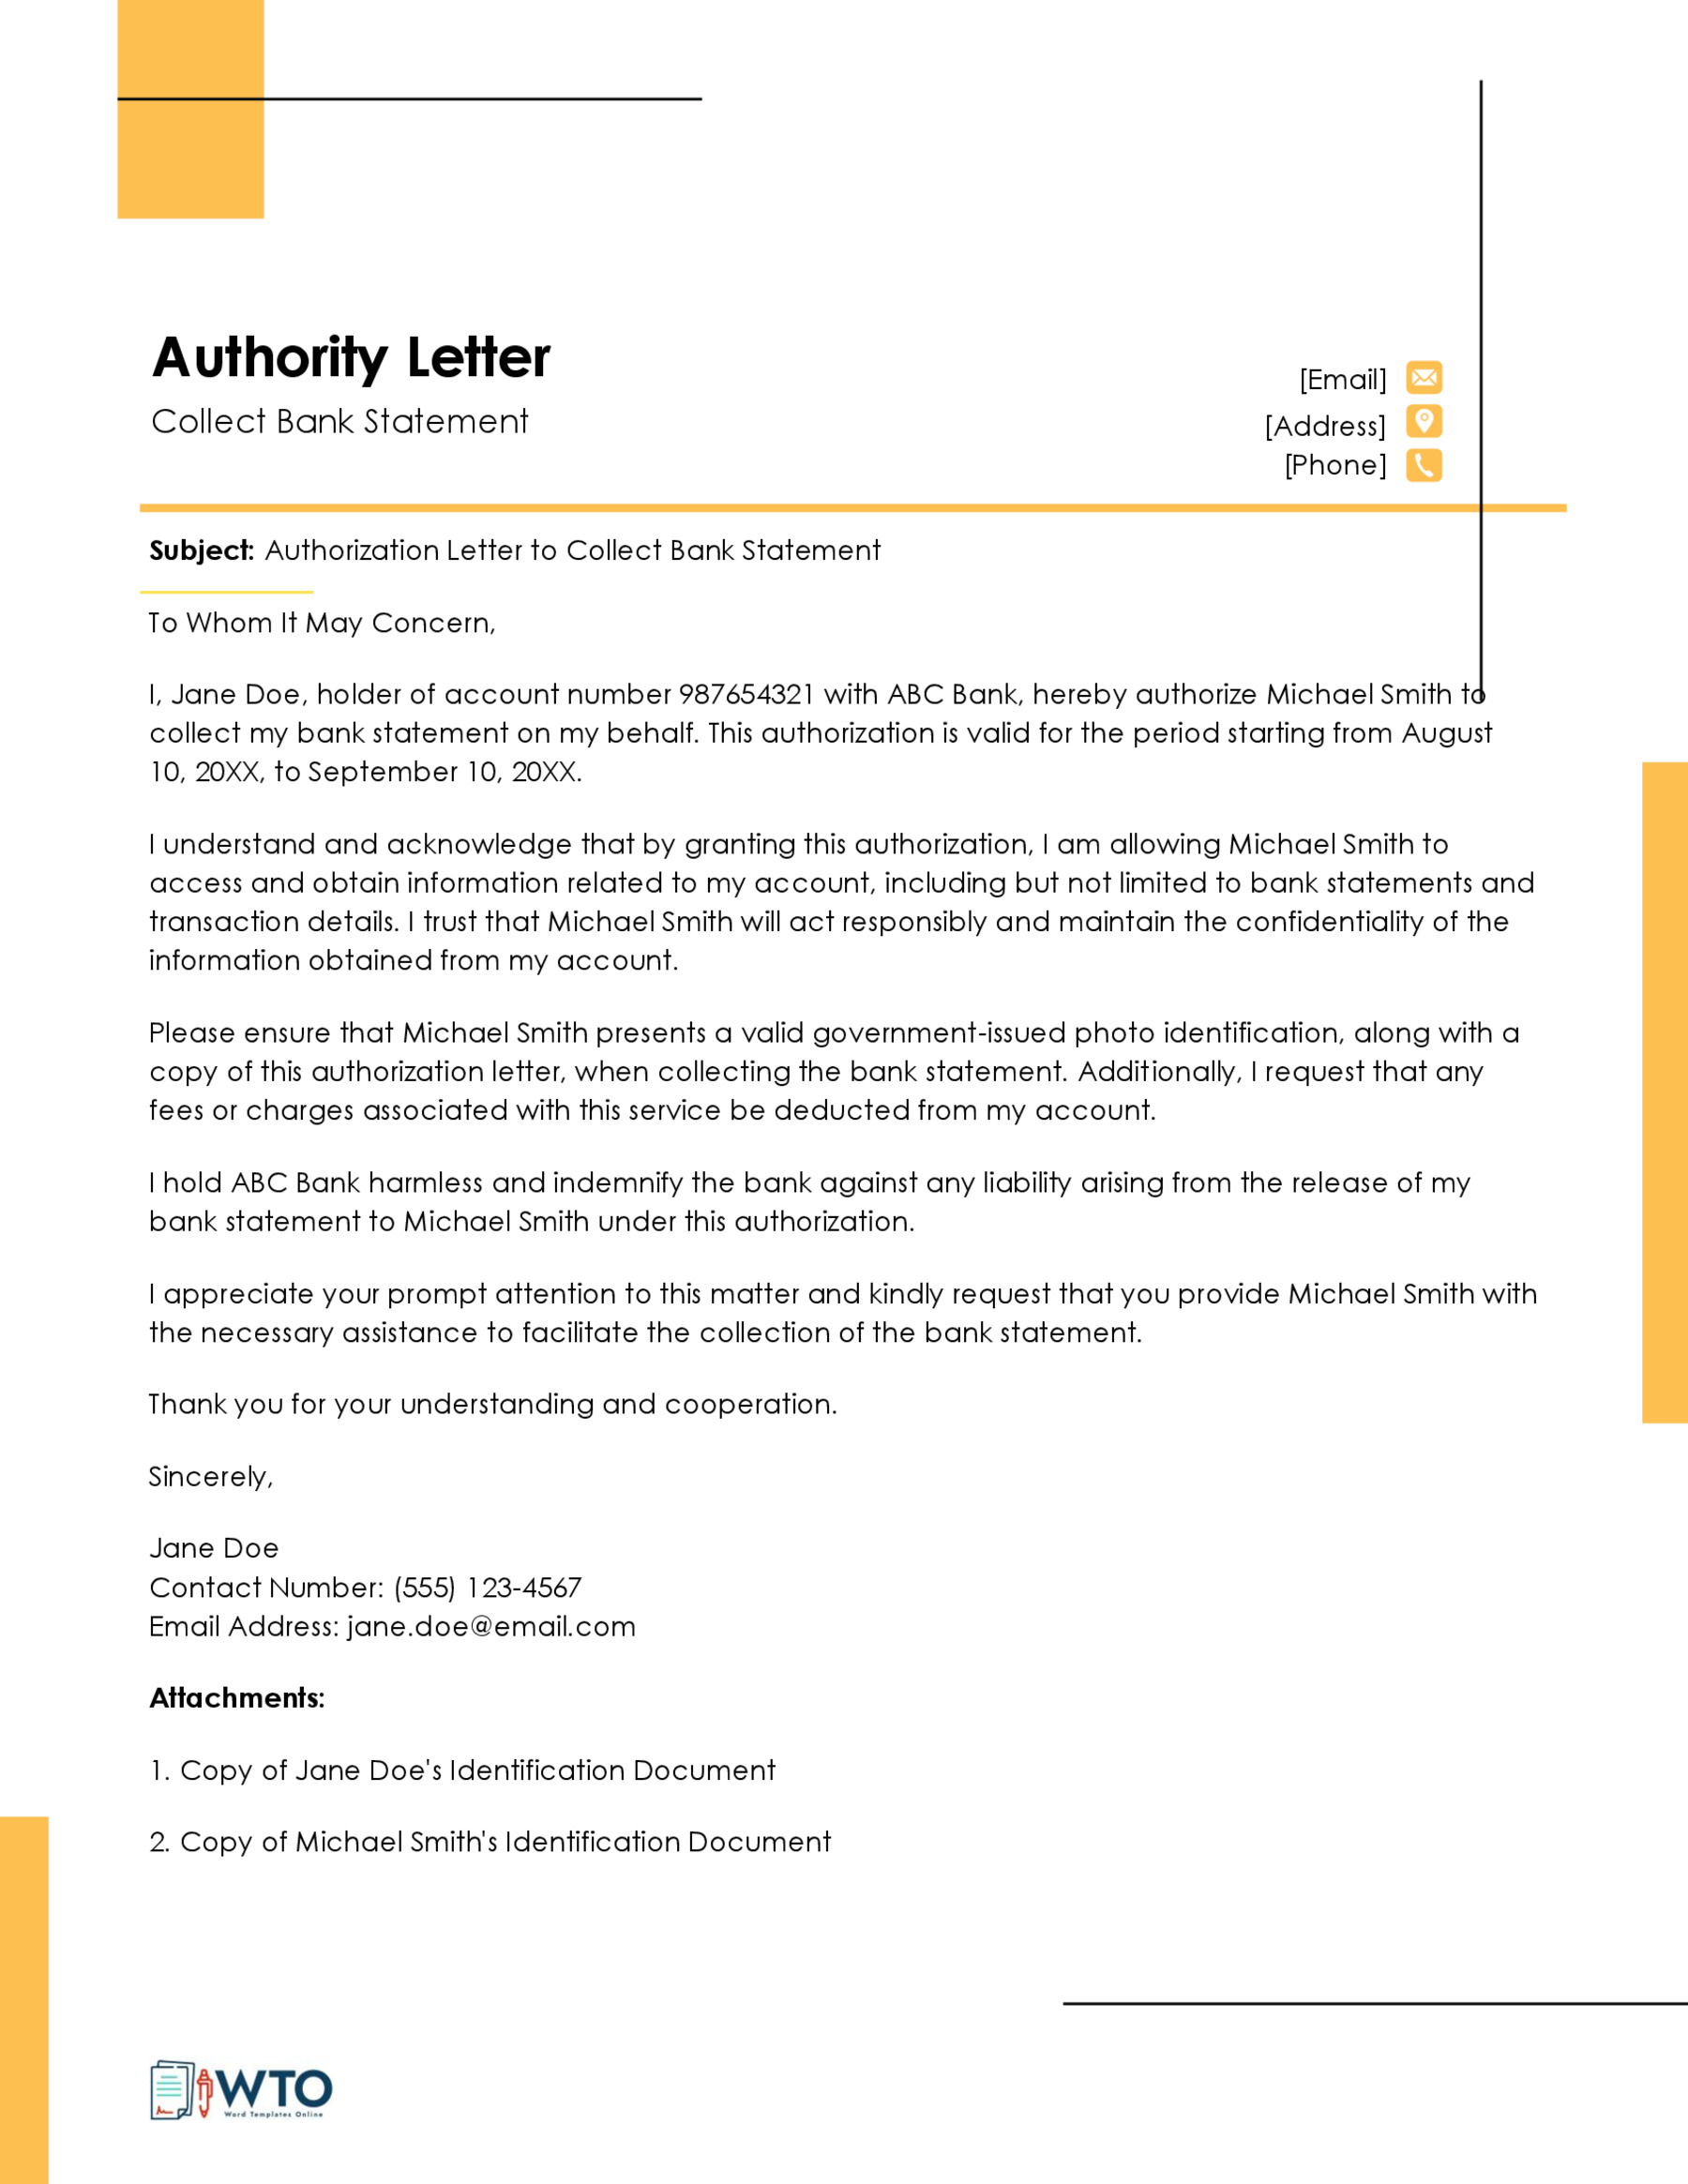 Authorization Letter to Collect Bank Statement Sample-Free download in ms word format